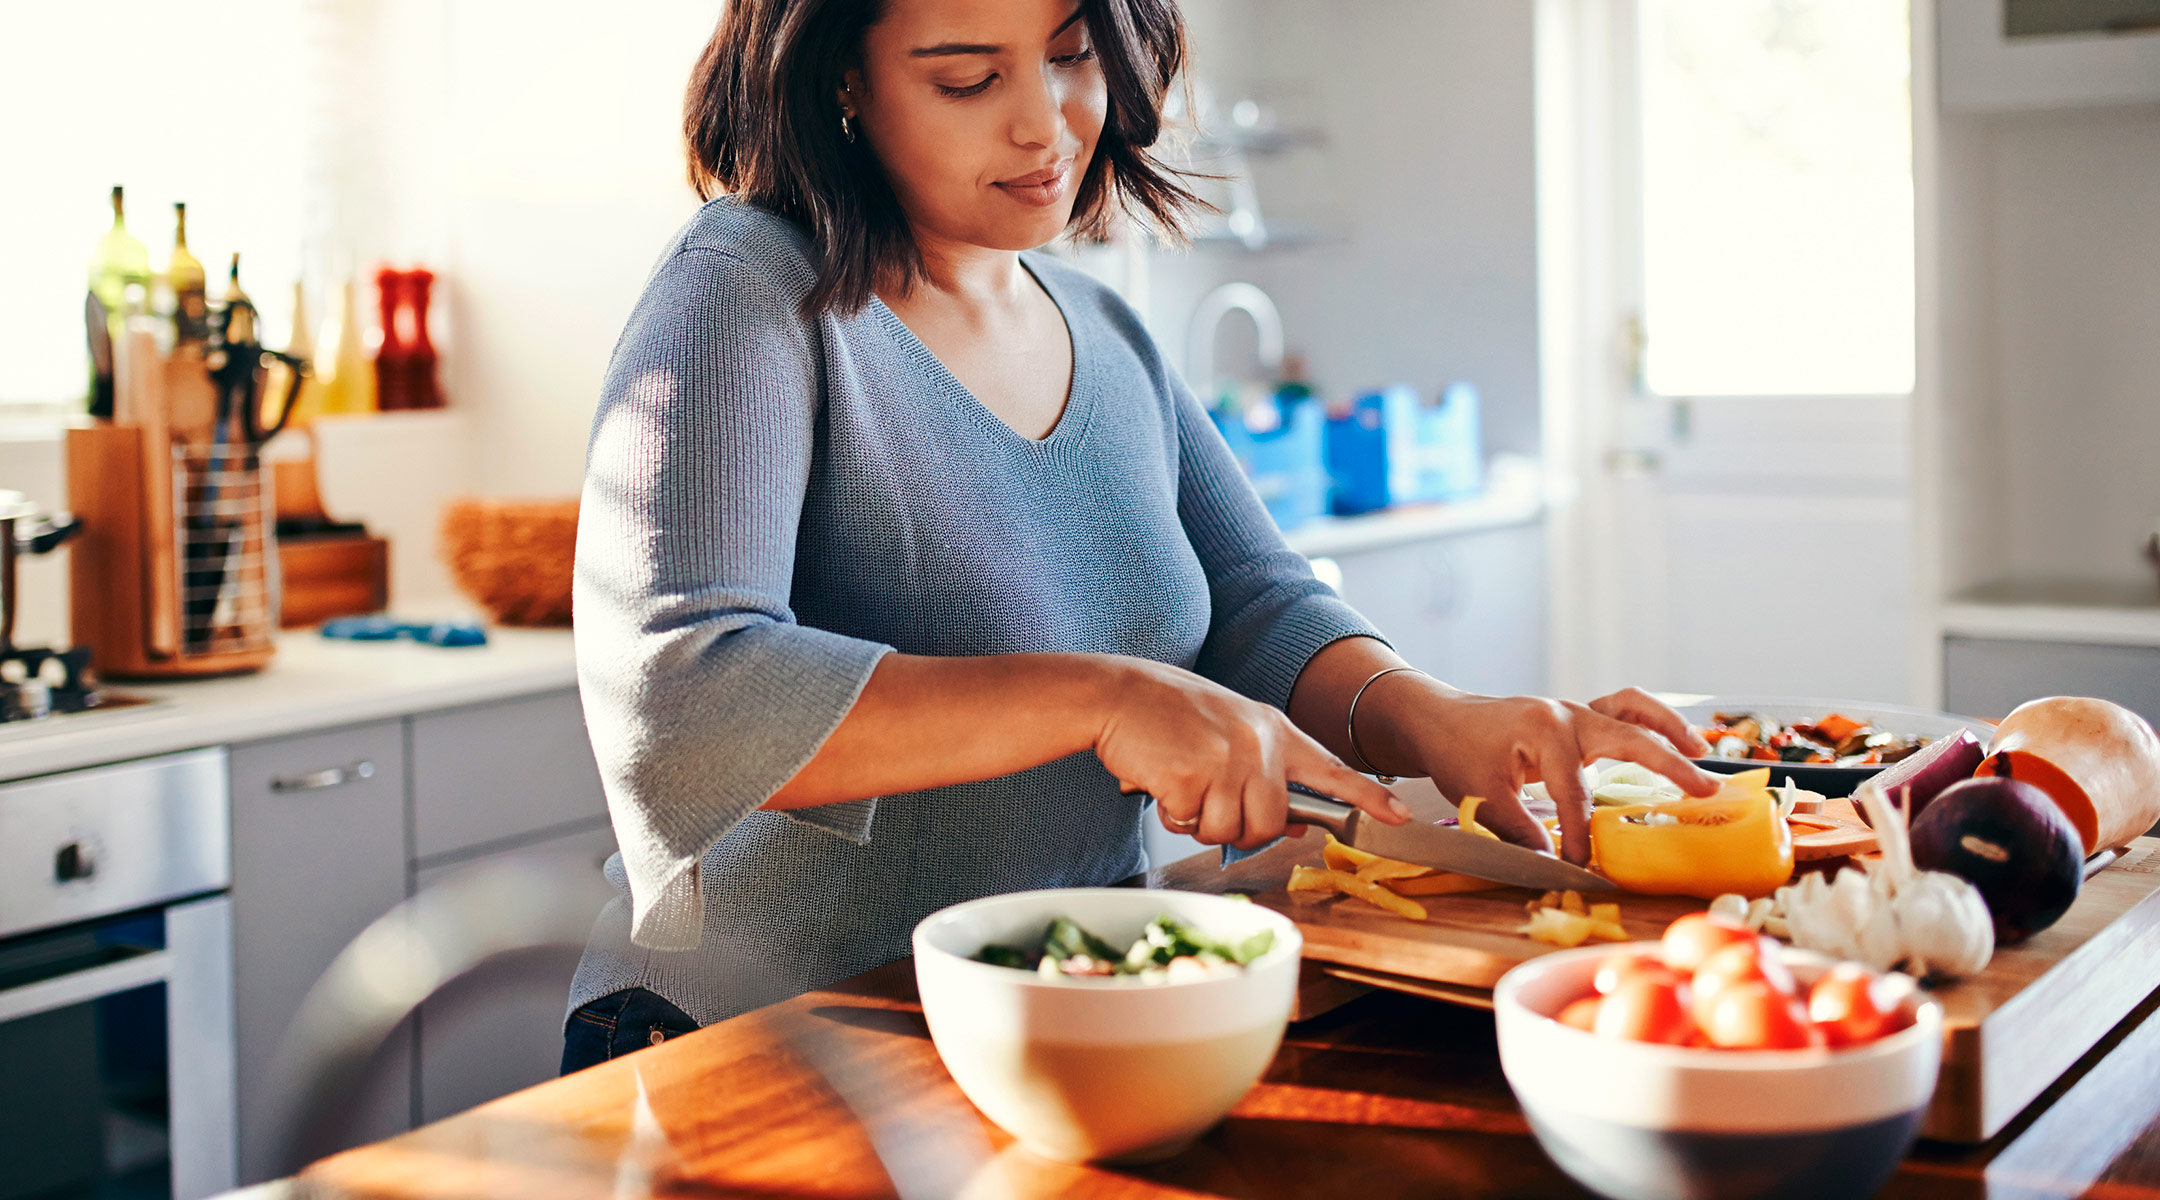 woman preparing healthy meal with vegetables in kitchen